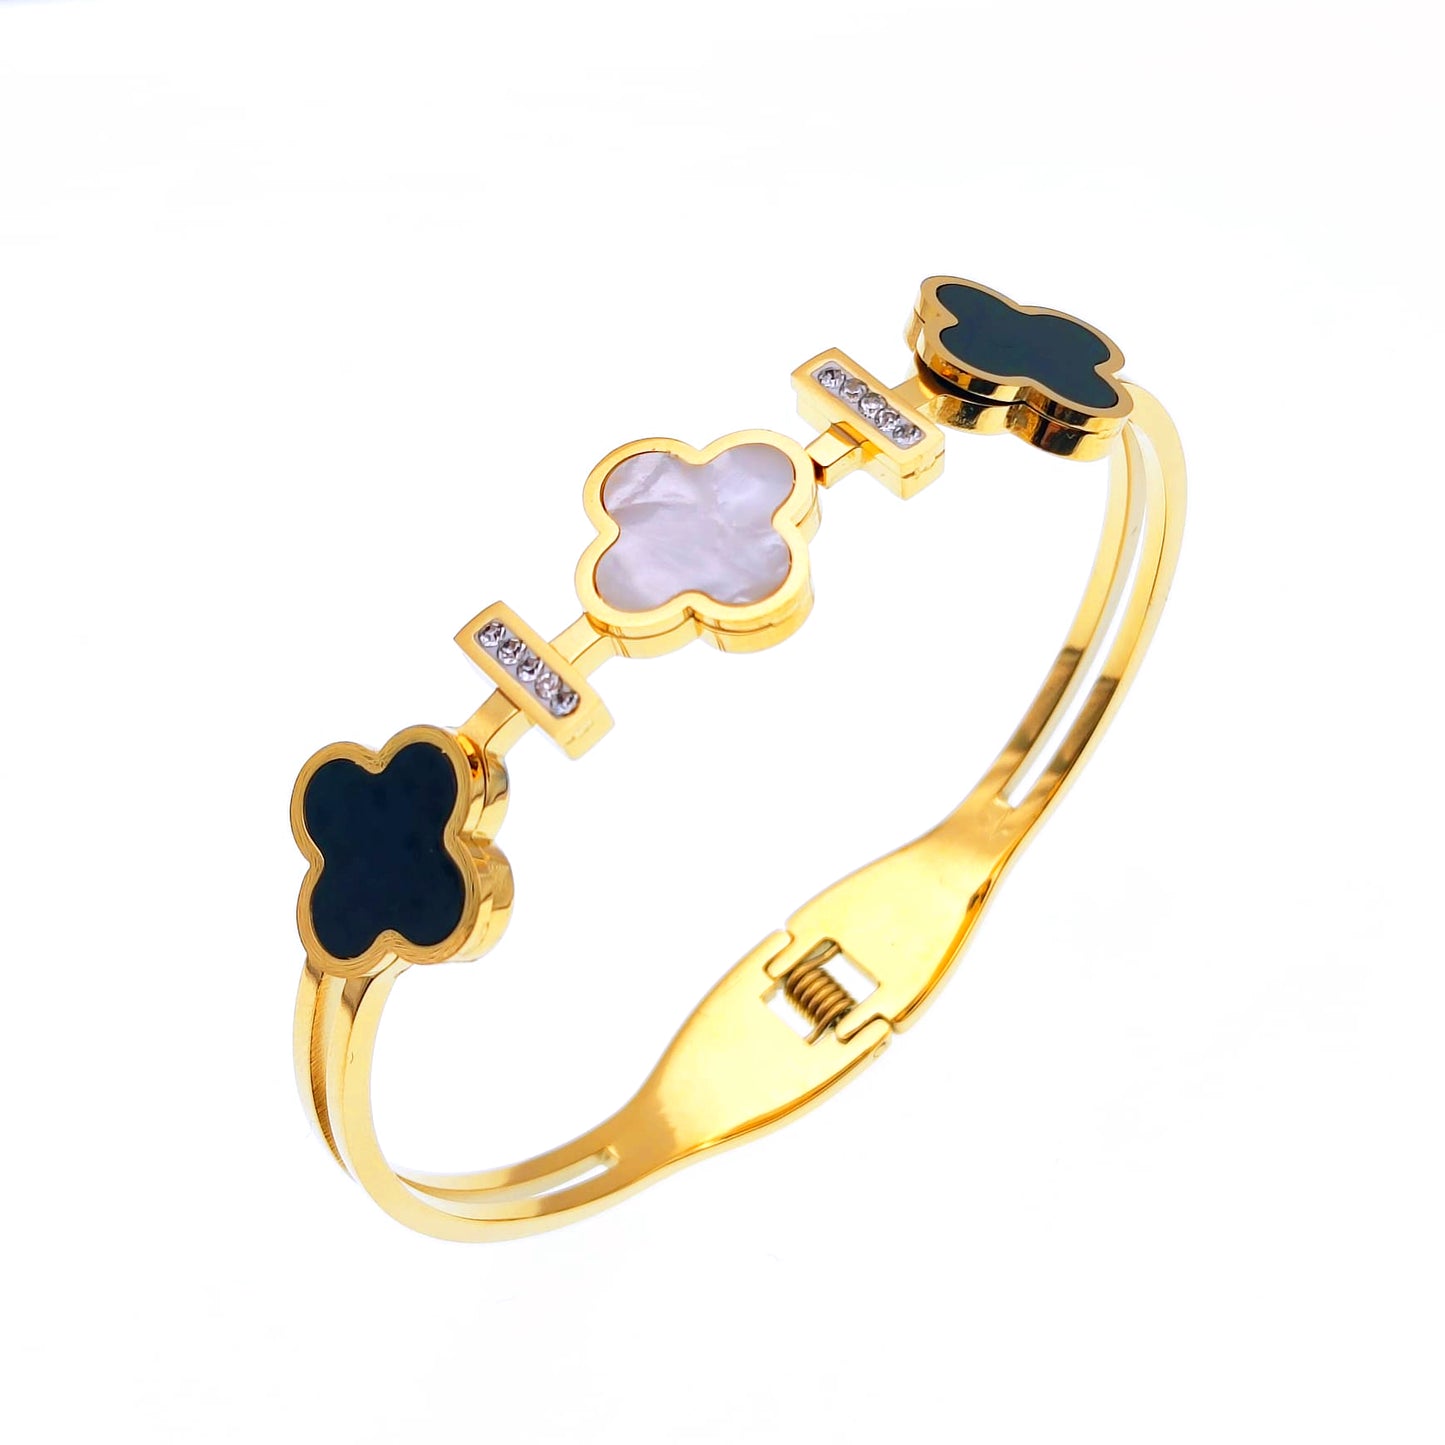 Image: Sparkling 18K gold four-leaf clover bracelet, designed for enduring elegance. Waterproof and stylish accessory for a timeless charm - Mia Ishaaq